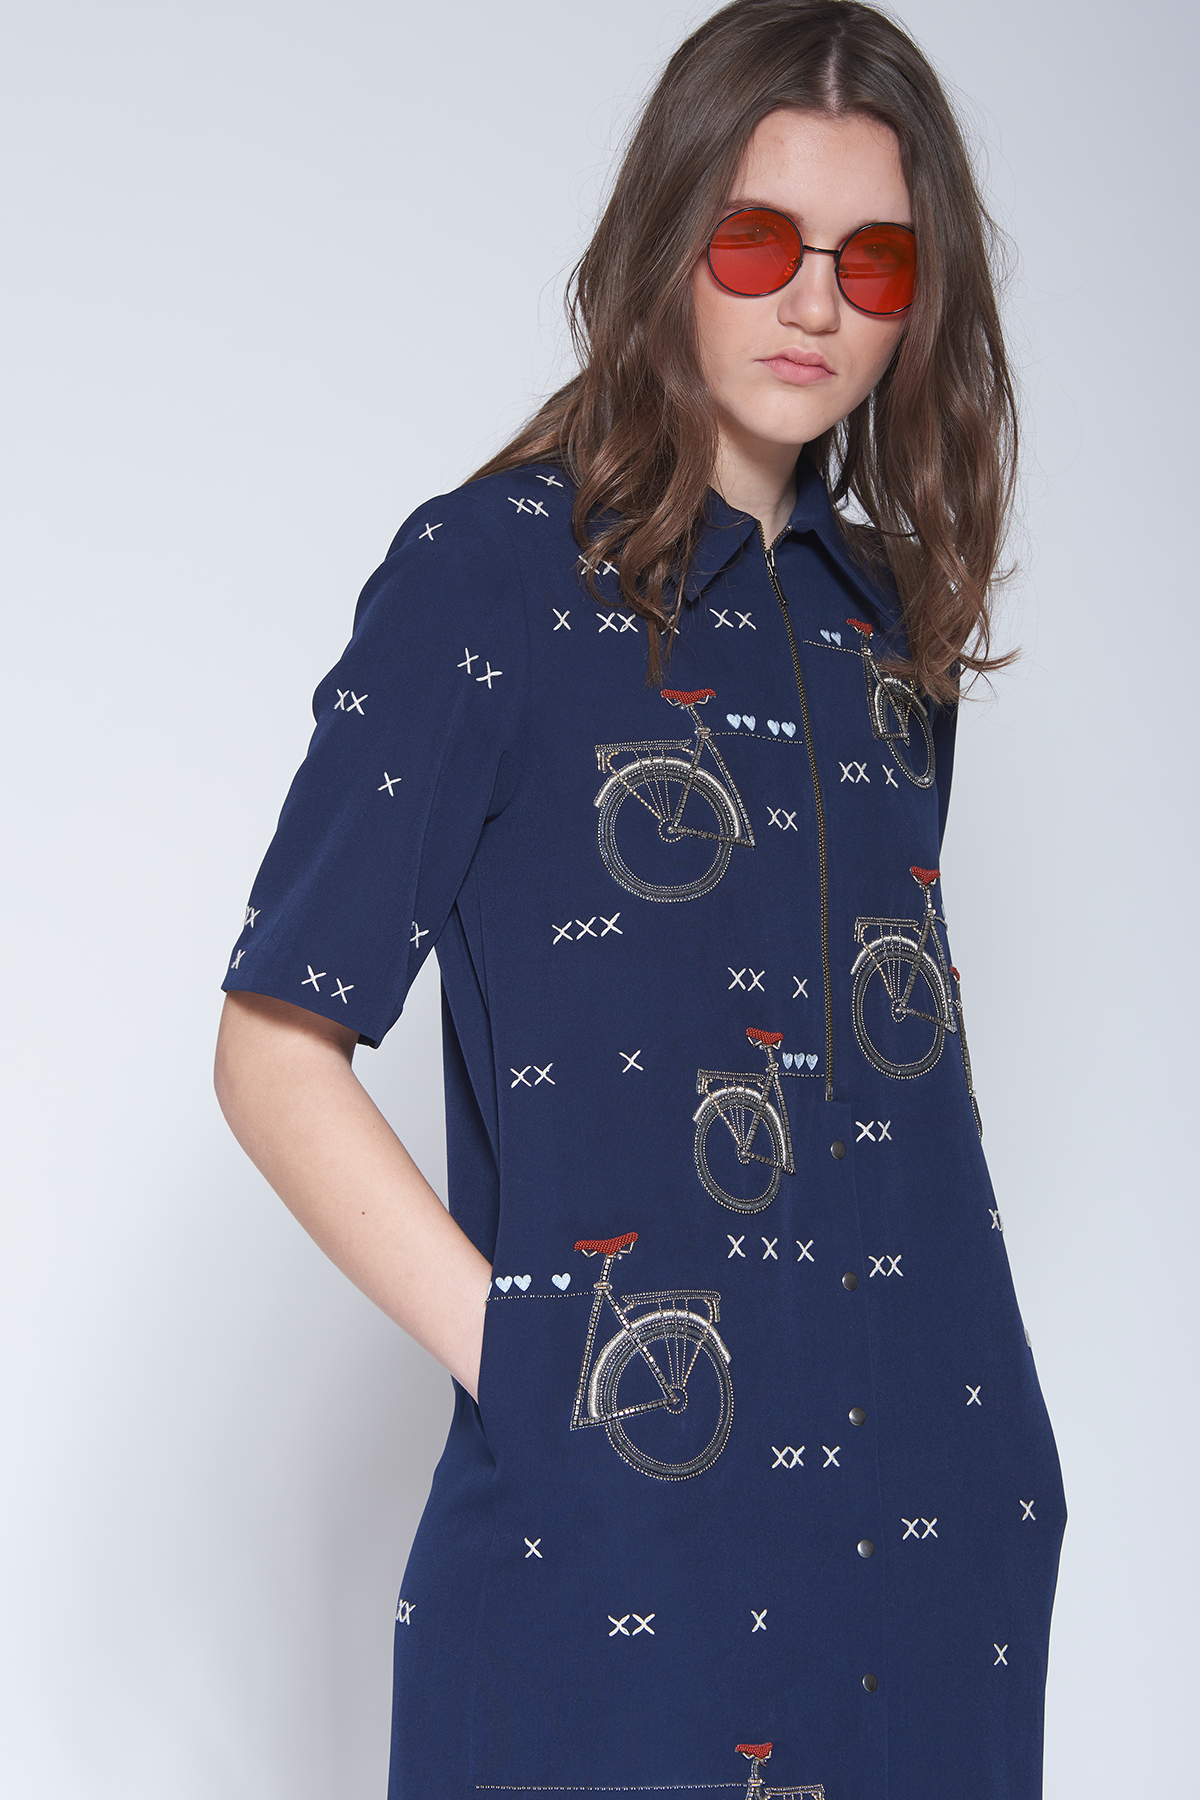 Infinity Bicycle Placement Shift Dress